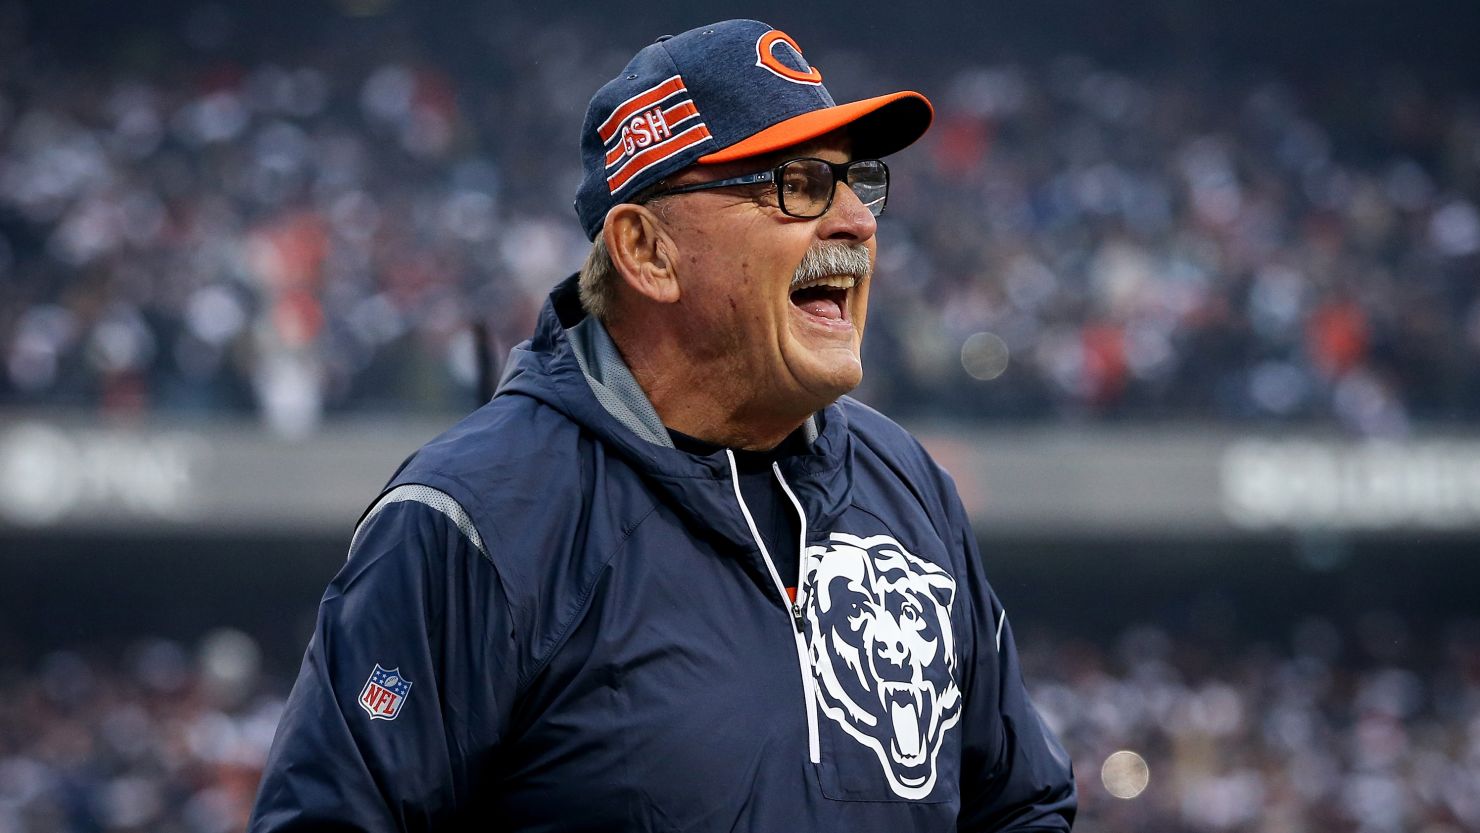 Dick Butkus cheers before an playoff game between the Chicago Bears and the Philadelphia Eagles in January 2019.